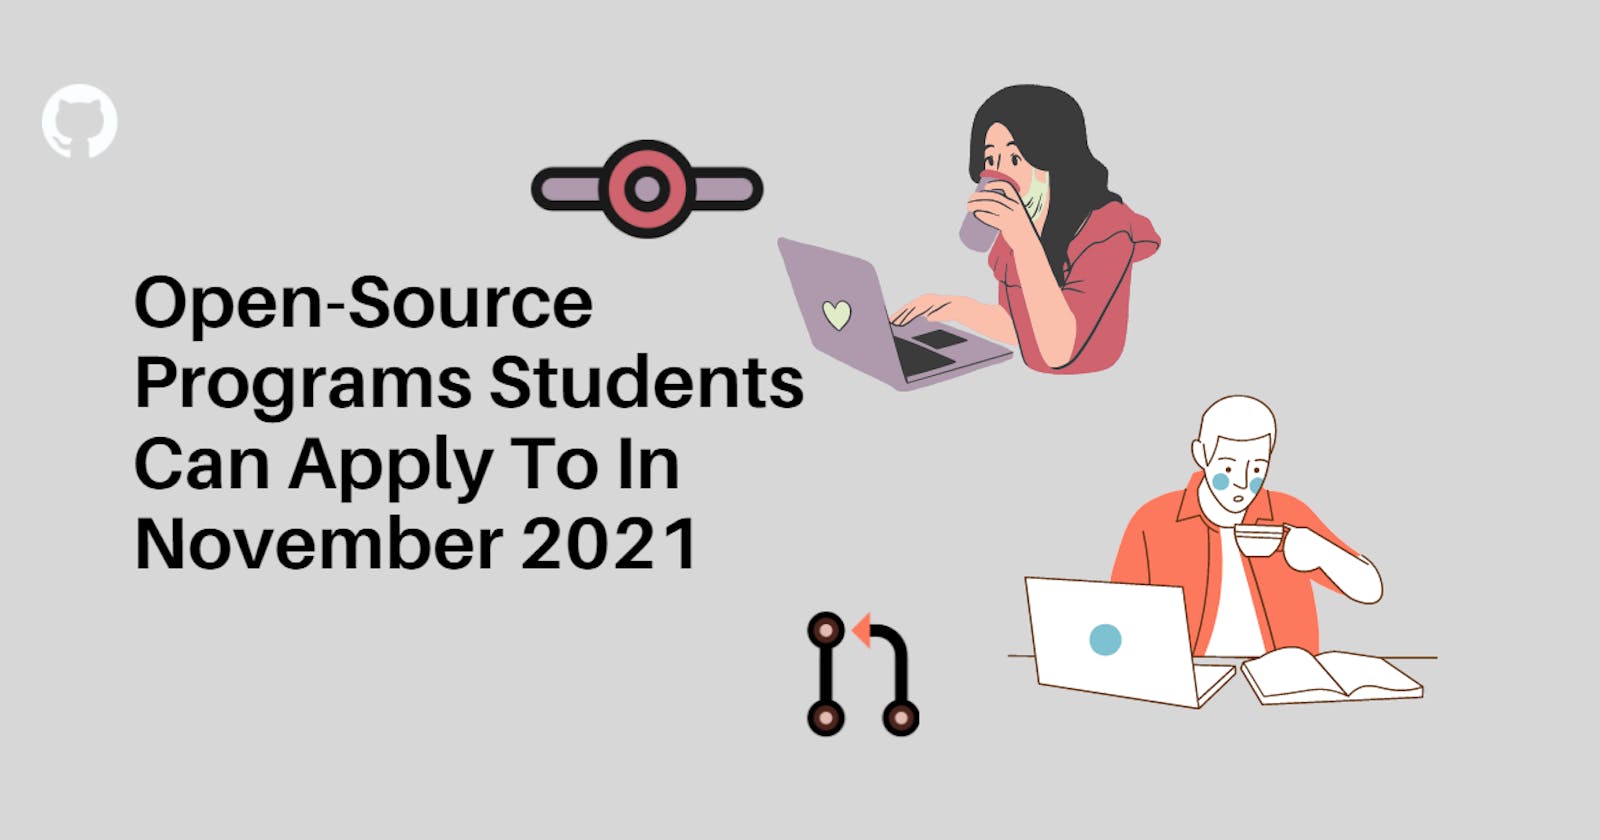 Open-Source Programs Students Can Apply To In November 2021